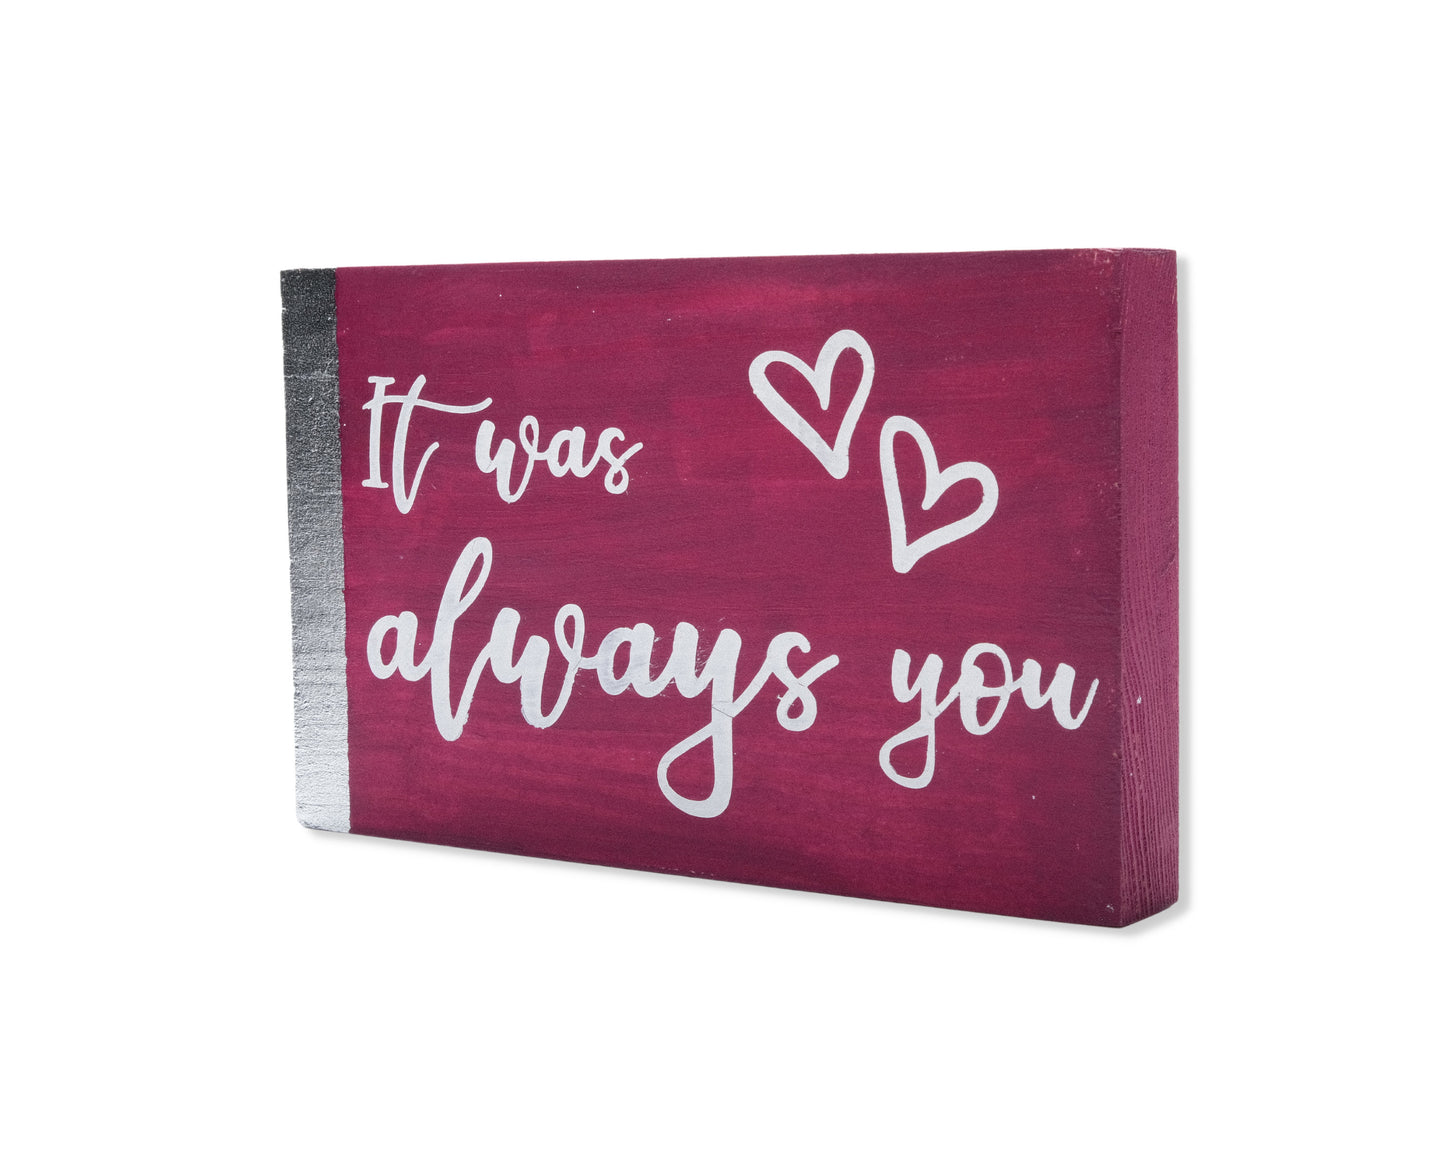 Small freestanding rectangular wooden sign displayed at 35 degree angle to show depth of sign. Magenta color, with silver vertical border on left side only. White painted message, It was always you, with two heart outlines in top right corner.